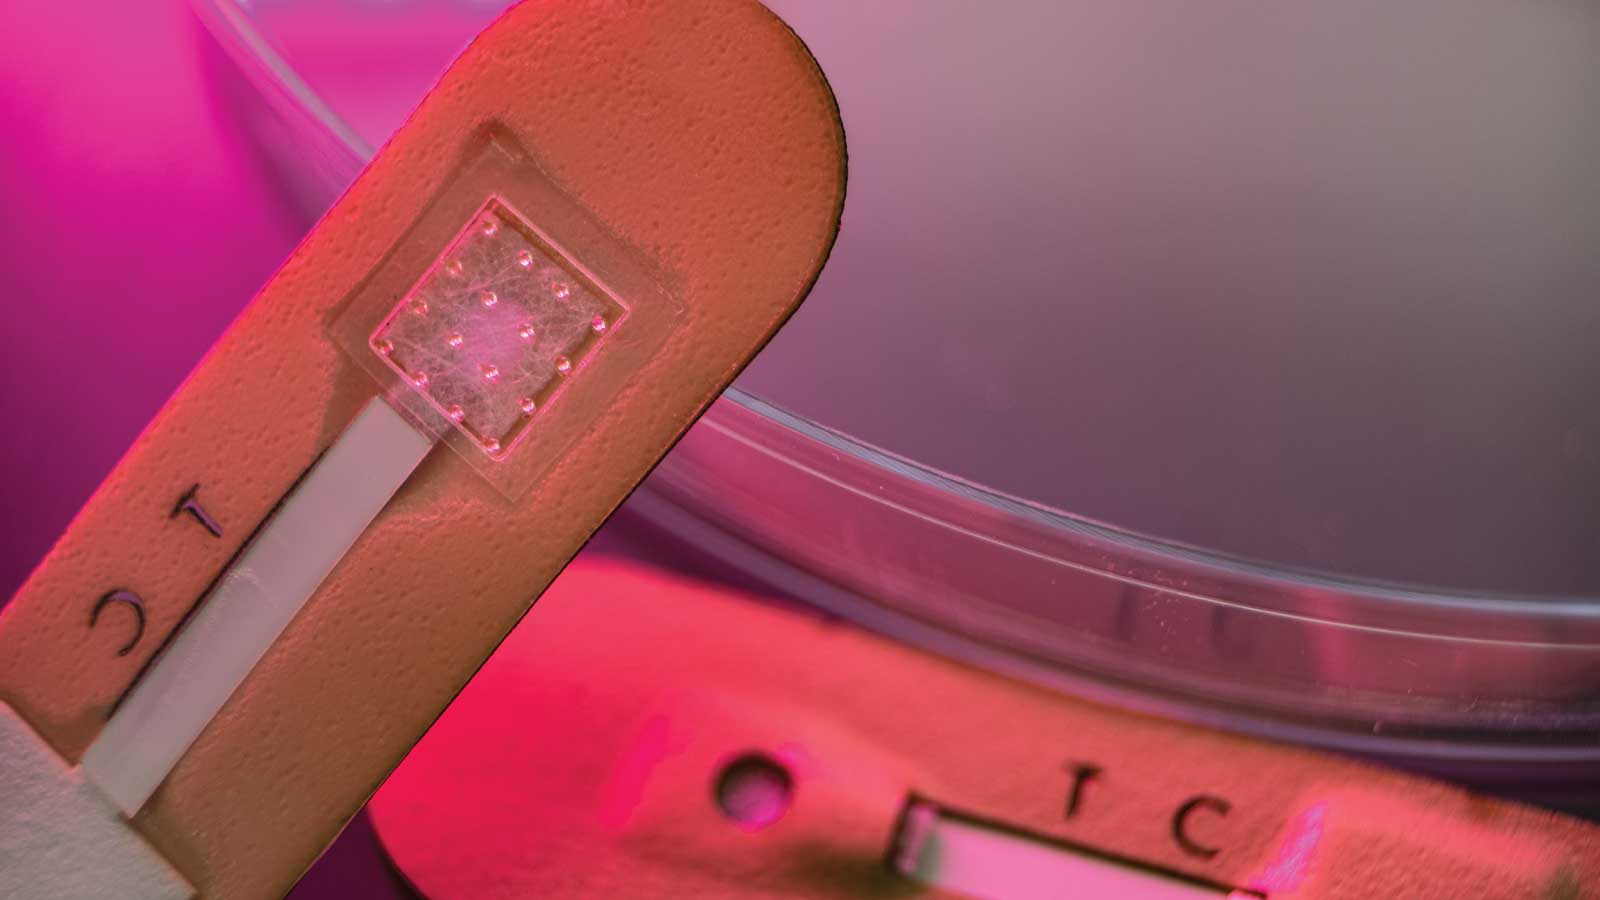 A bandagelike test for malaria features an array of microneedles that collect interstitial fluid from skin and delivers results on a test strip within minutes.